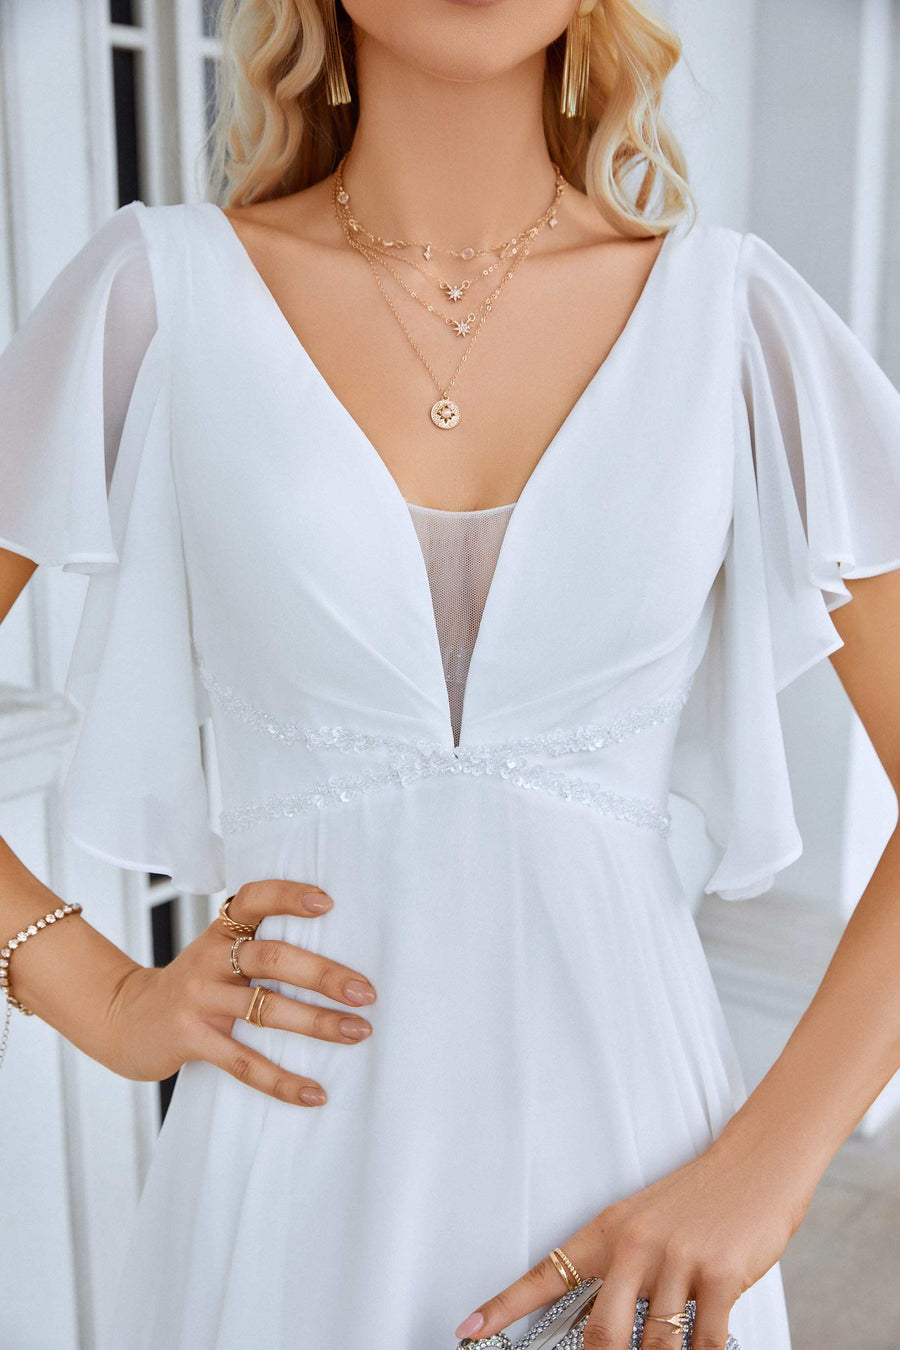 White Chiffon V-Neck A-Line Long Dress with Flared Sleeves